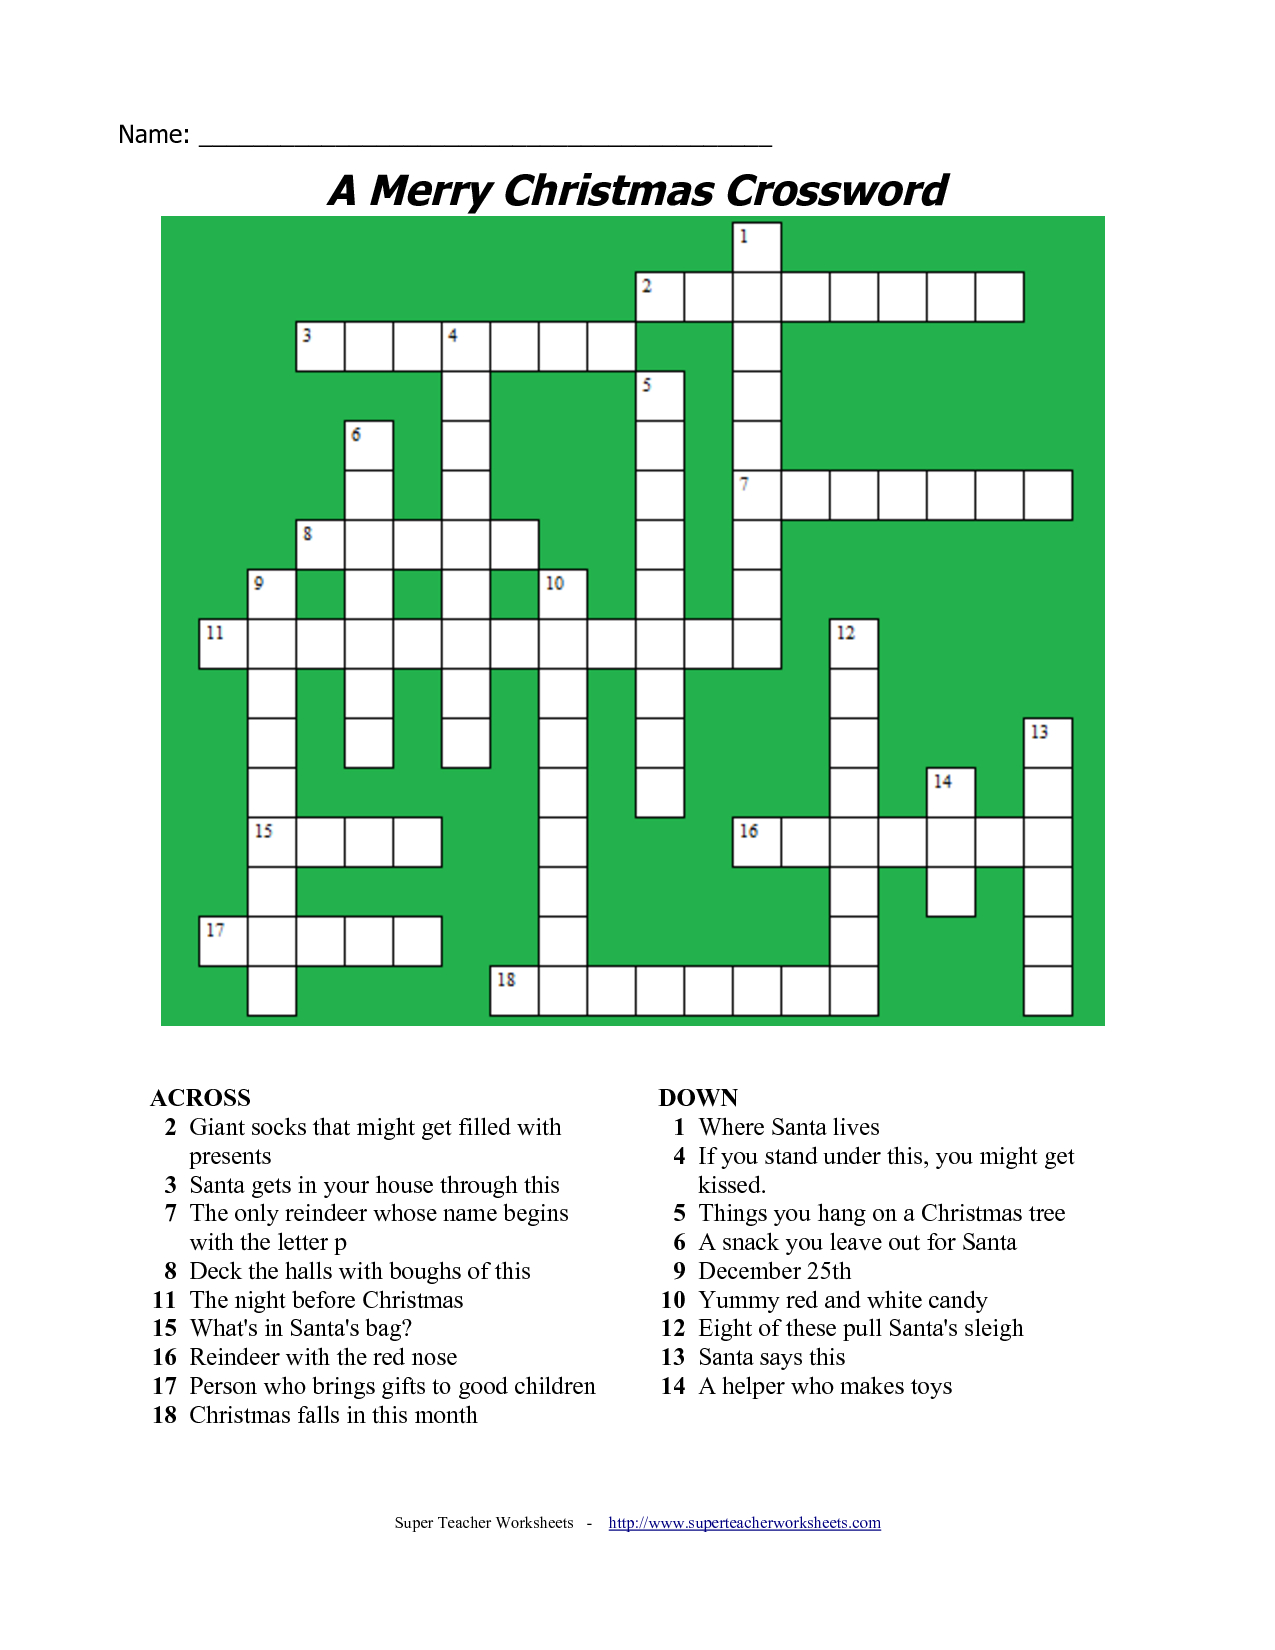 20 Fun Printable Christmas Crossword Puzzles | Kittybabylove - Printable Christmas Crossword Puzzles For Adults With Answers